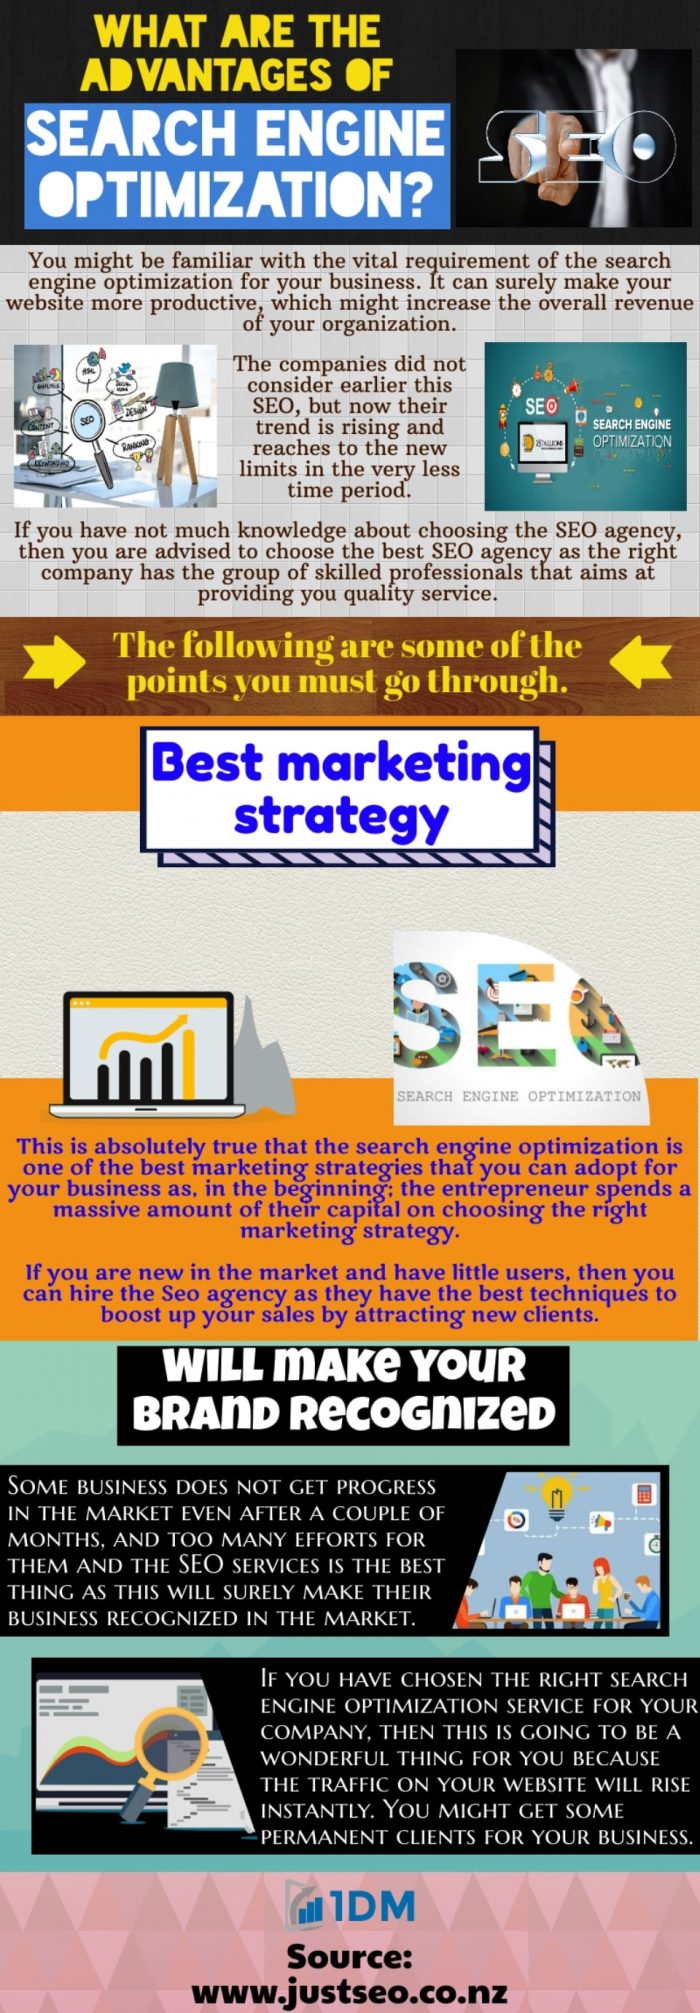 Essential to find the right SEO agency